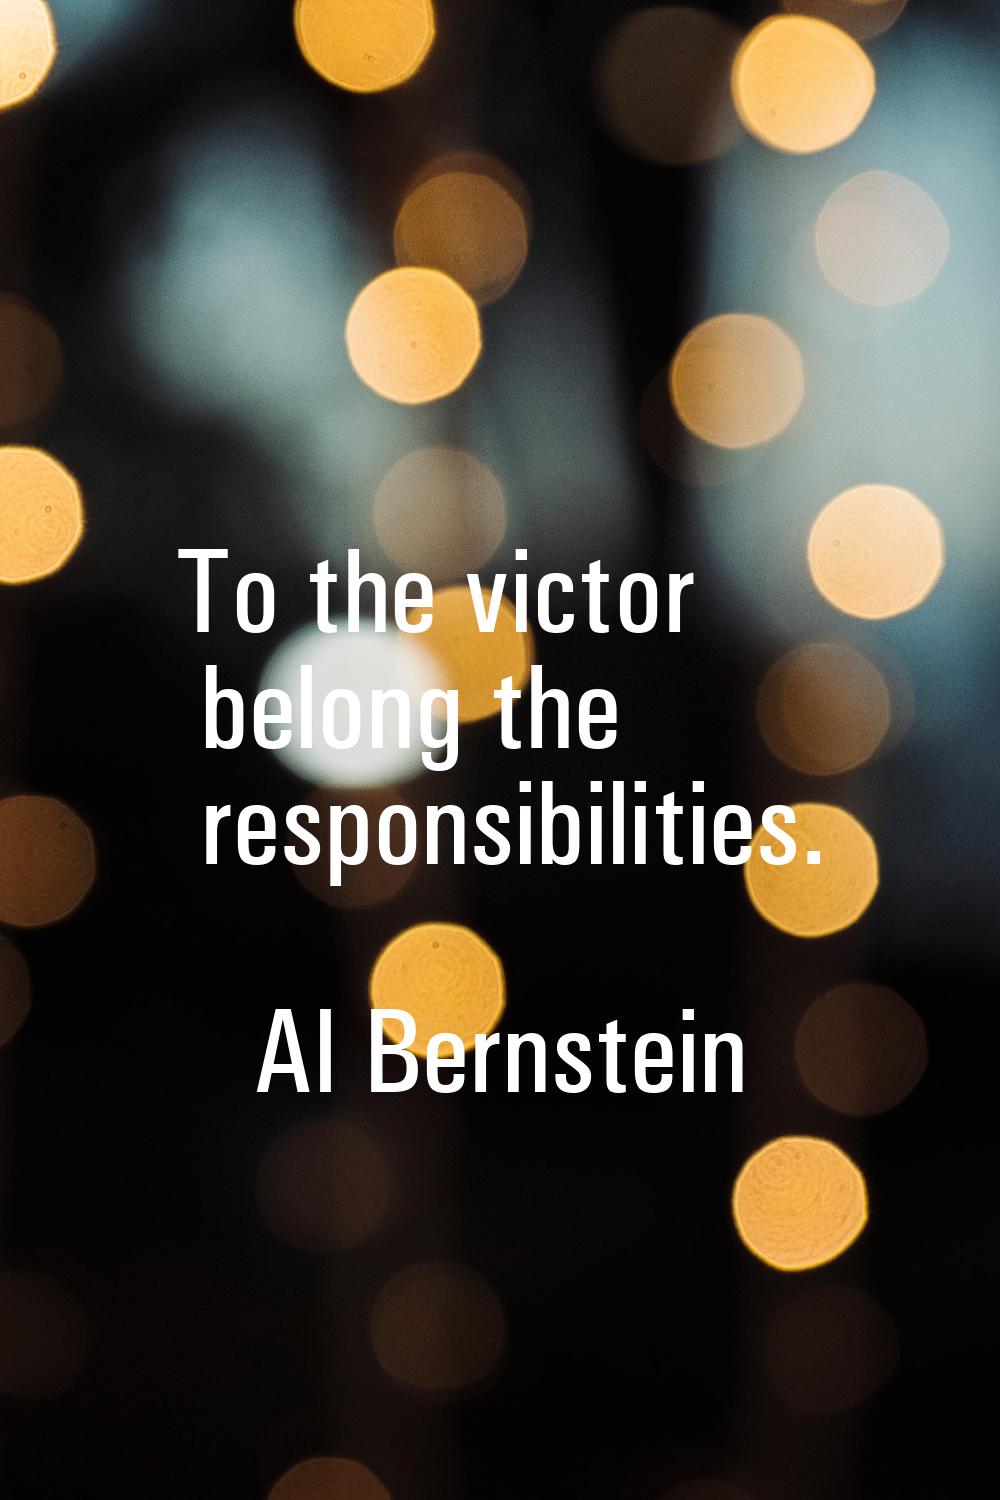 To the victor belong the responsibilities.